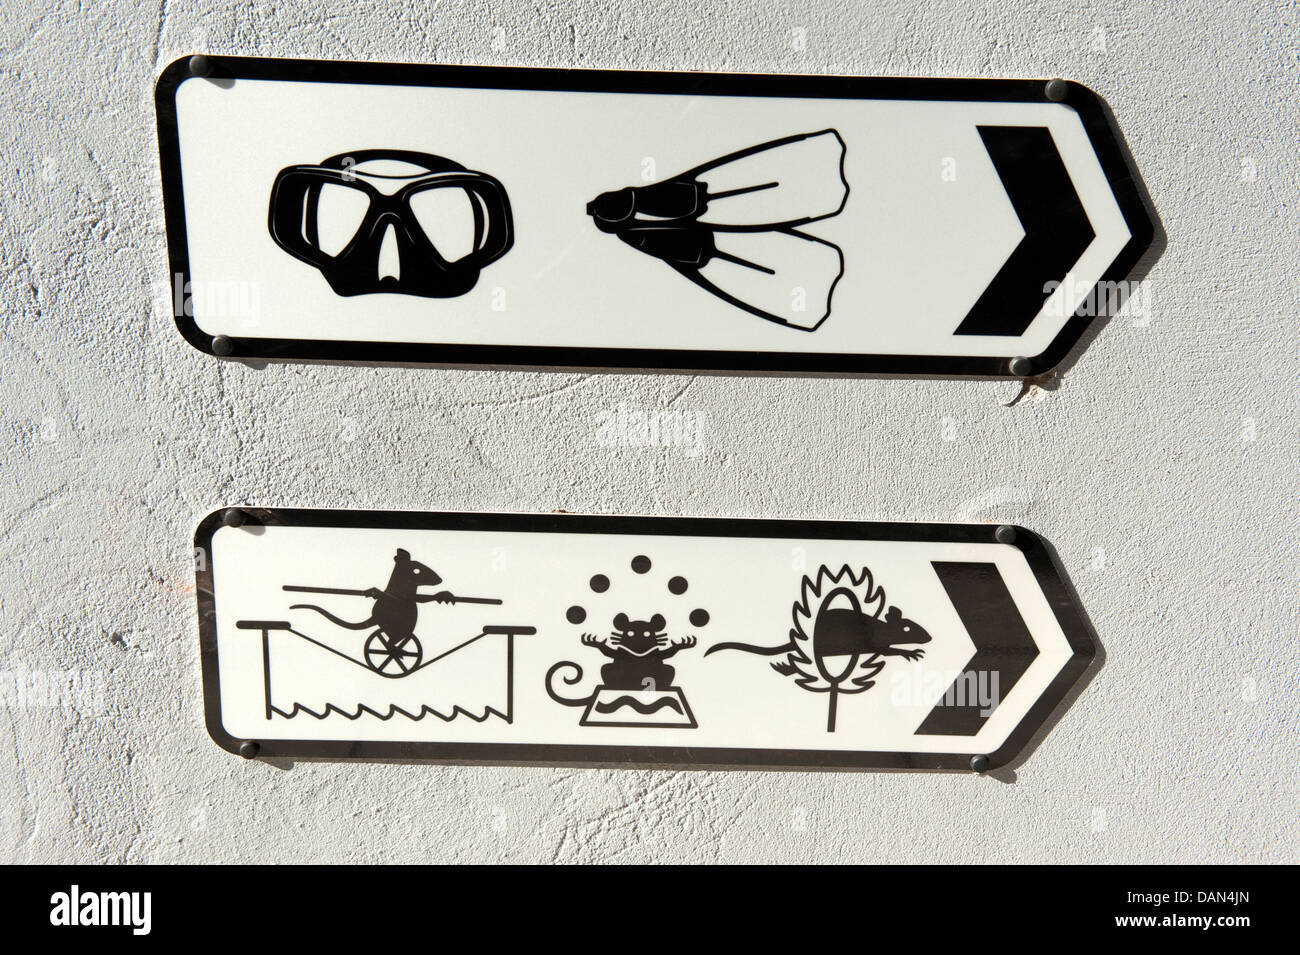 Sign Snorkeling Goggles Flippers Arrow Right Stock Photo